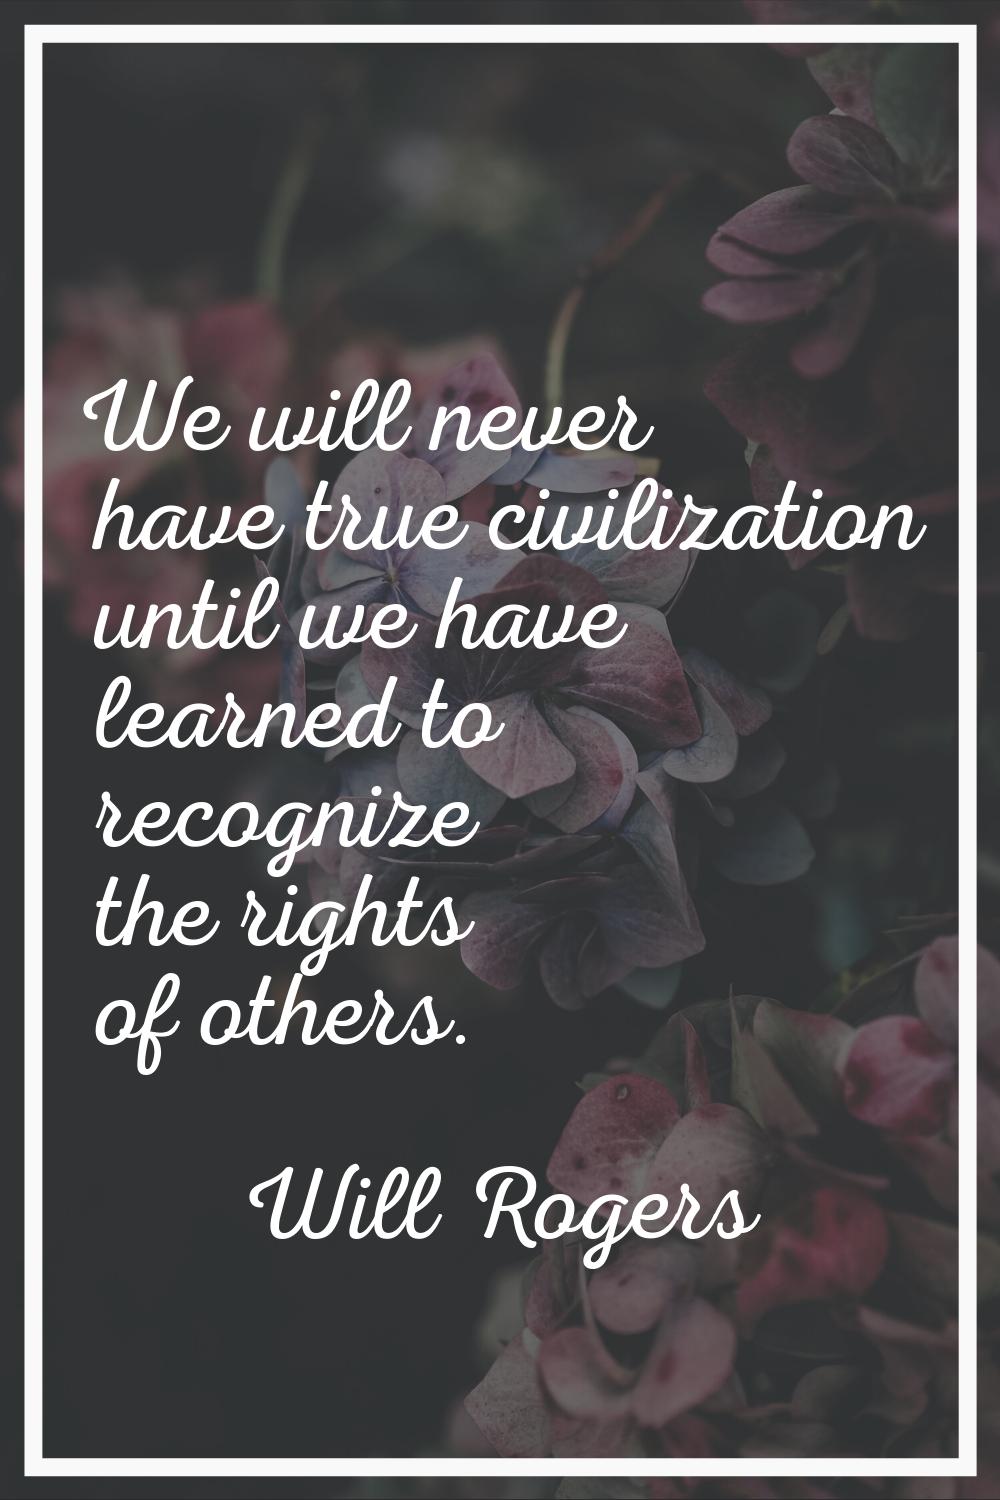 We will never have true civilization until we have learned to recognize the rights of others.